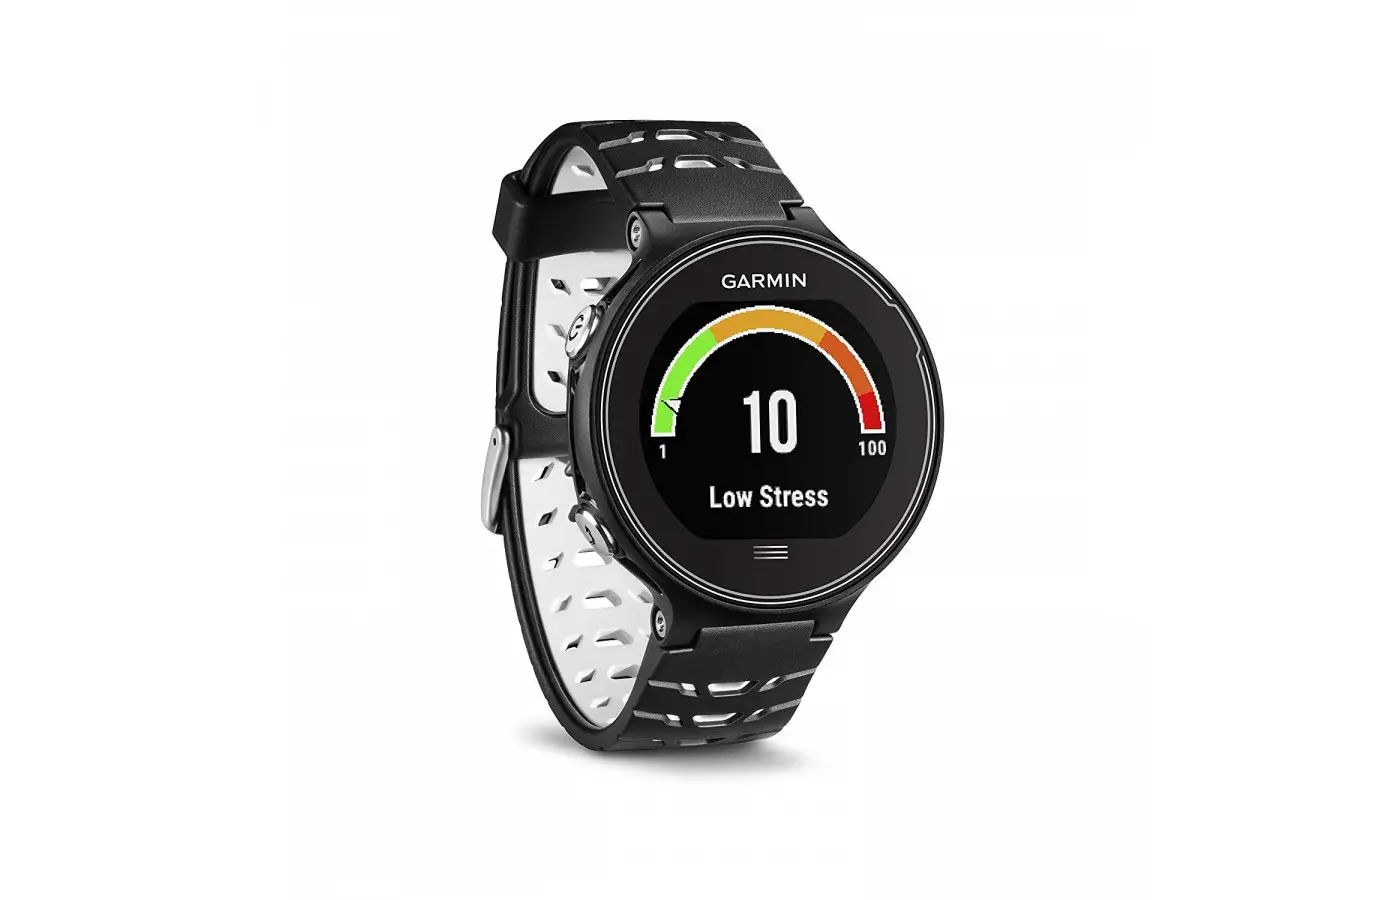 The Garmin Forerunner 630  offers a stress score in order to create mindfulness and awareness in the wearers less active life.